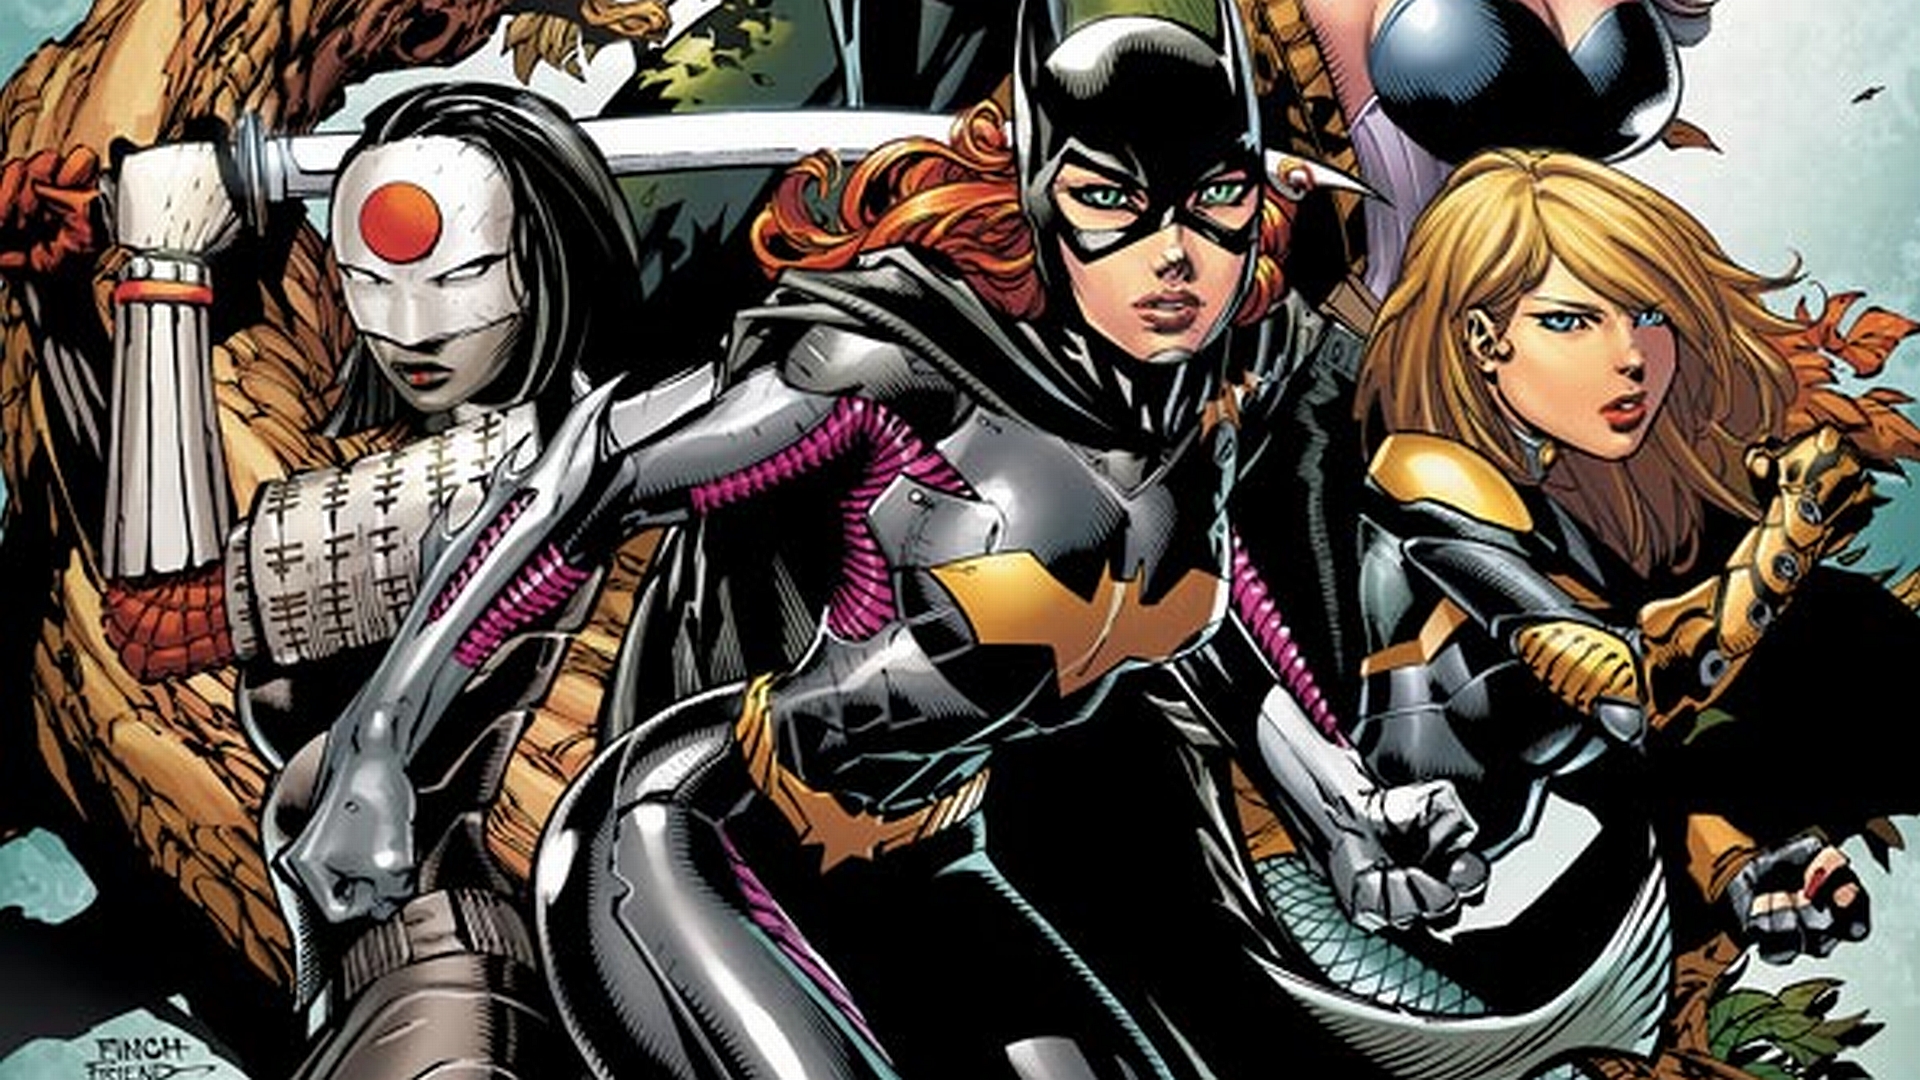 Superhero trio of Katana, Batgirl, and Black Canary in vibrant bodysuits, armed with weapons, ready for action